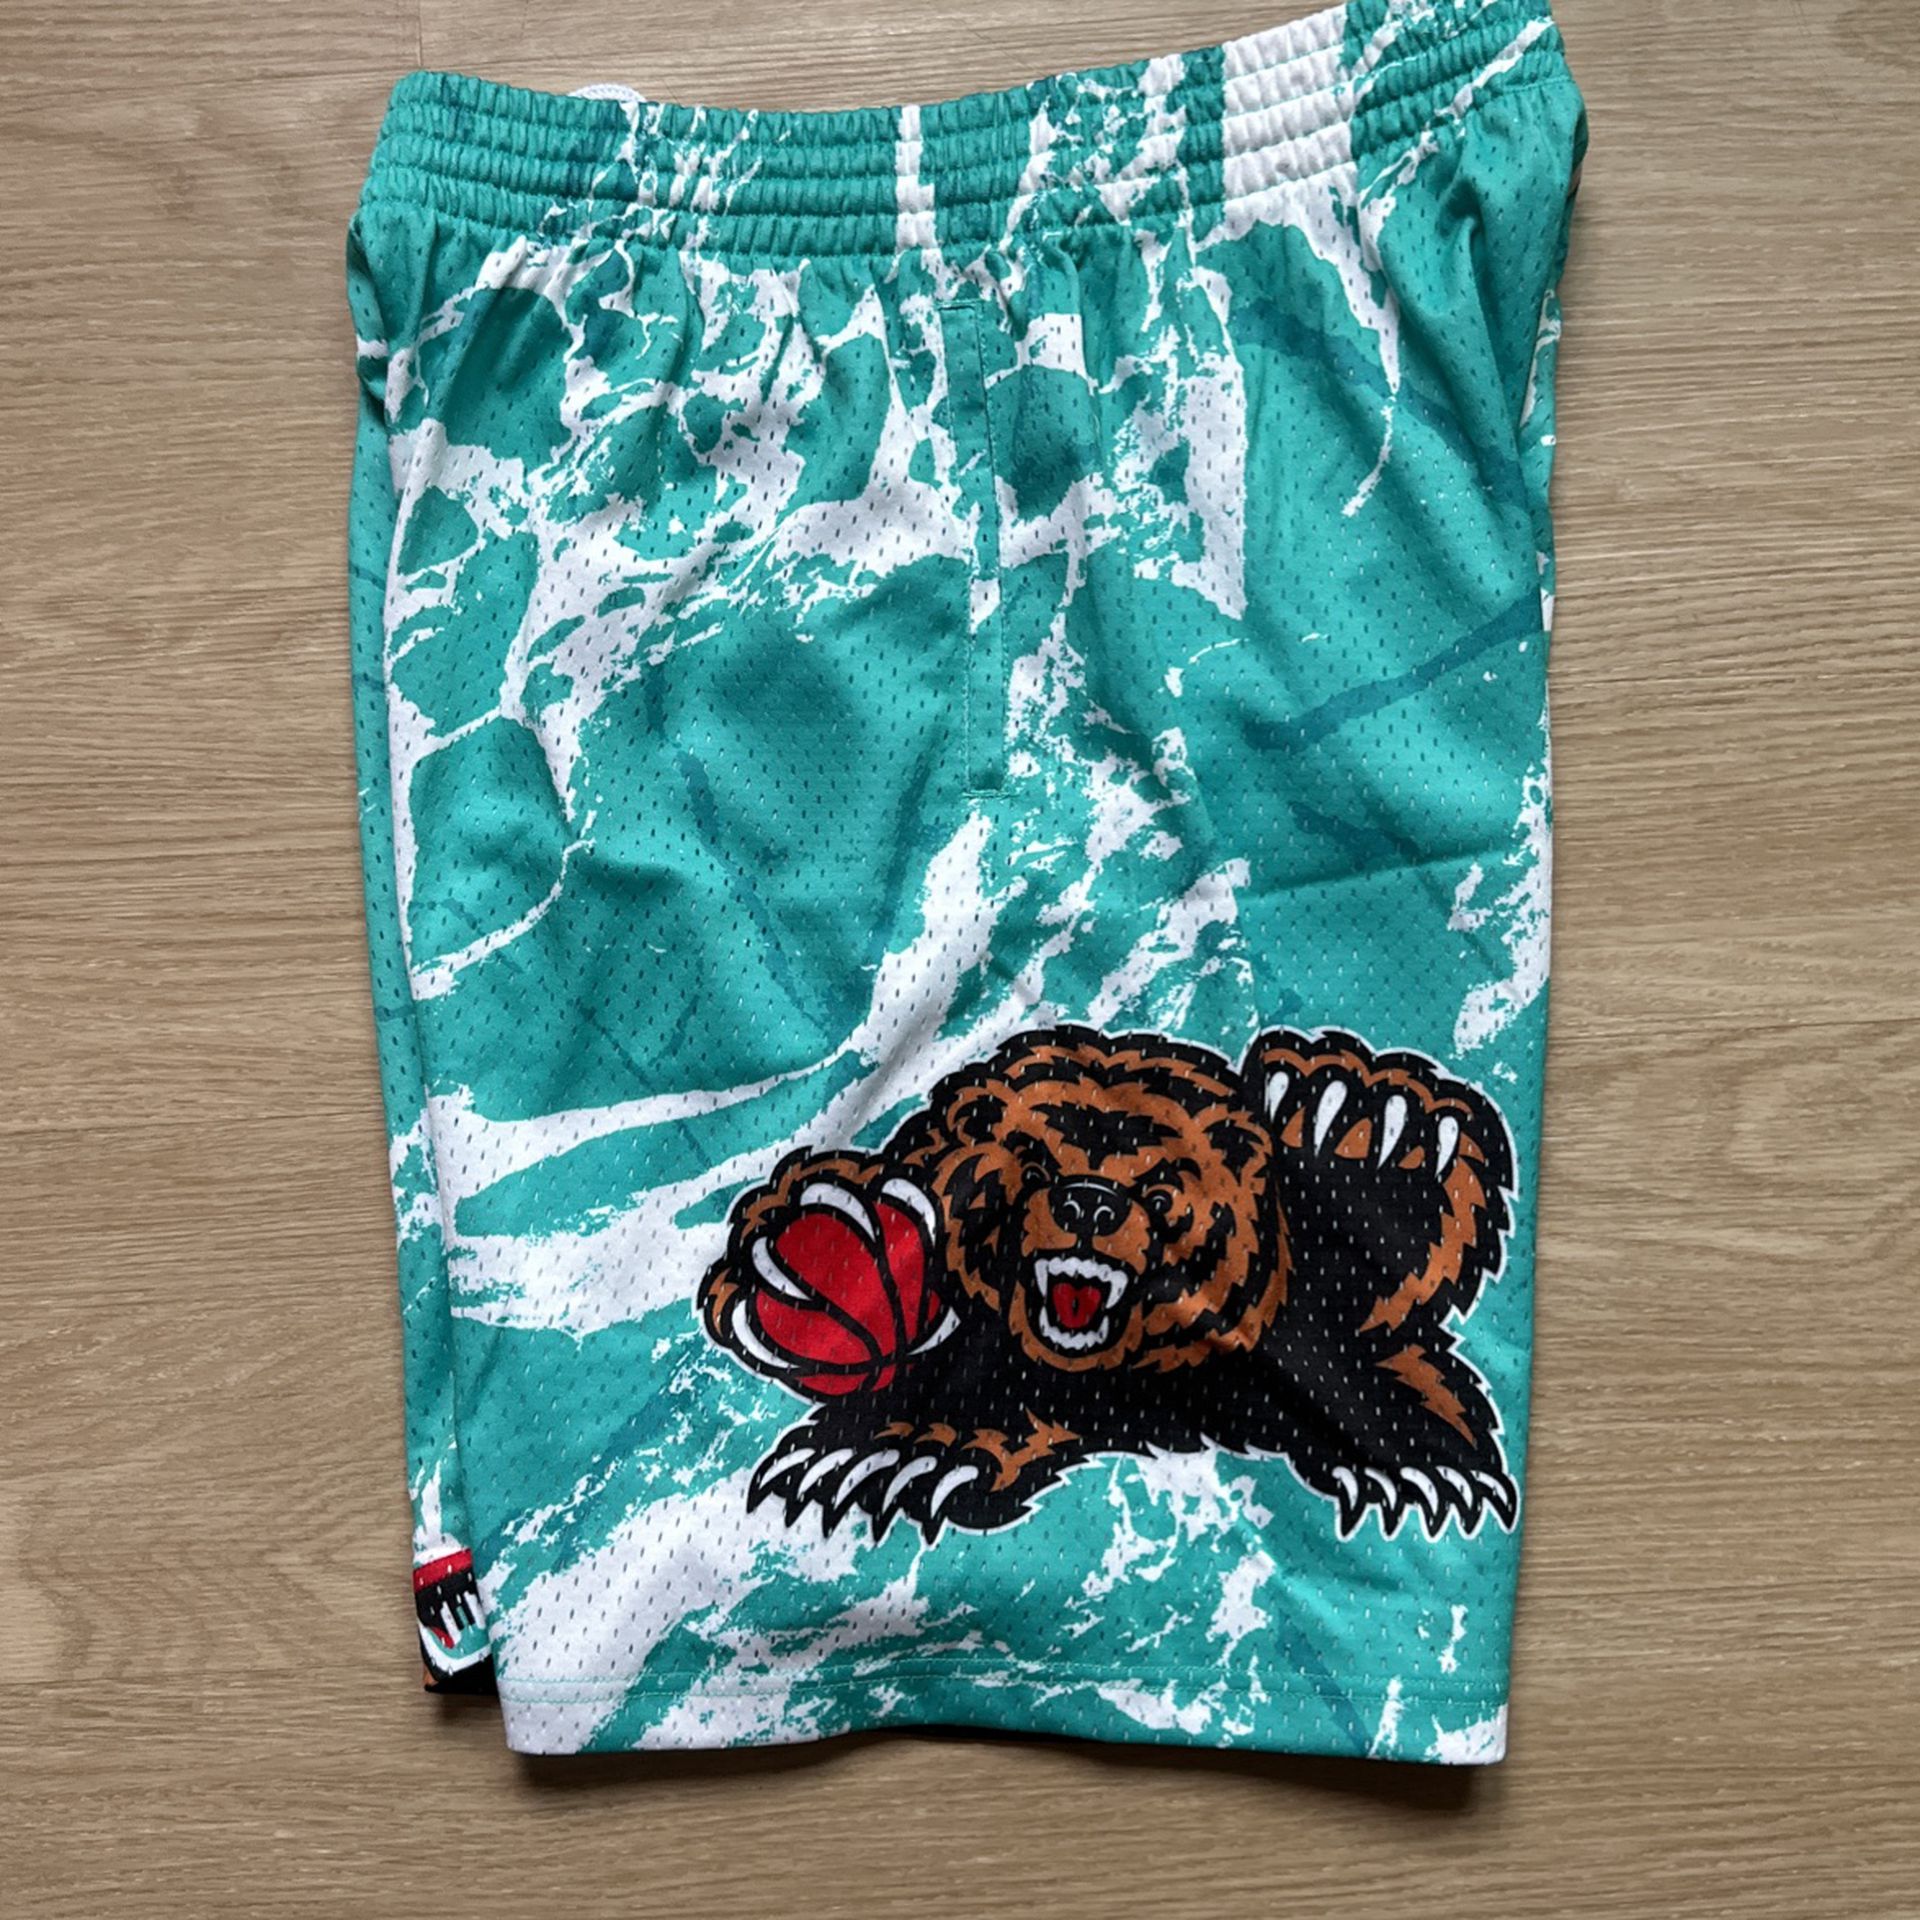 Mitchell & Ness Vancouver Grizzlies NBA Swingman Shorts Men's Large for  Sale in Los Angeles, CA - OfferUp